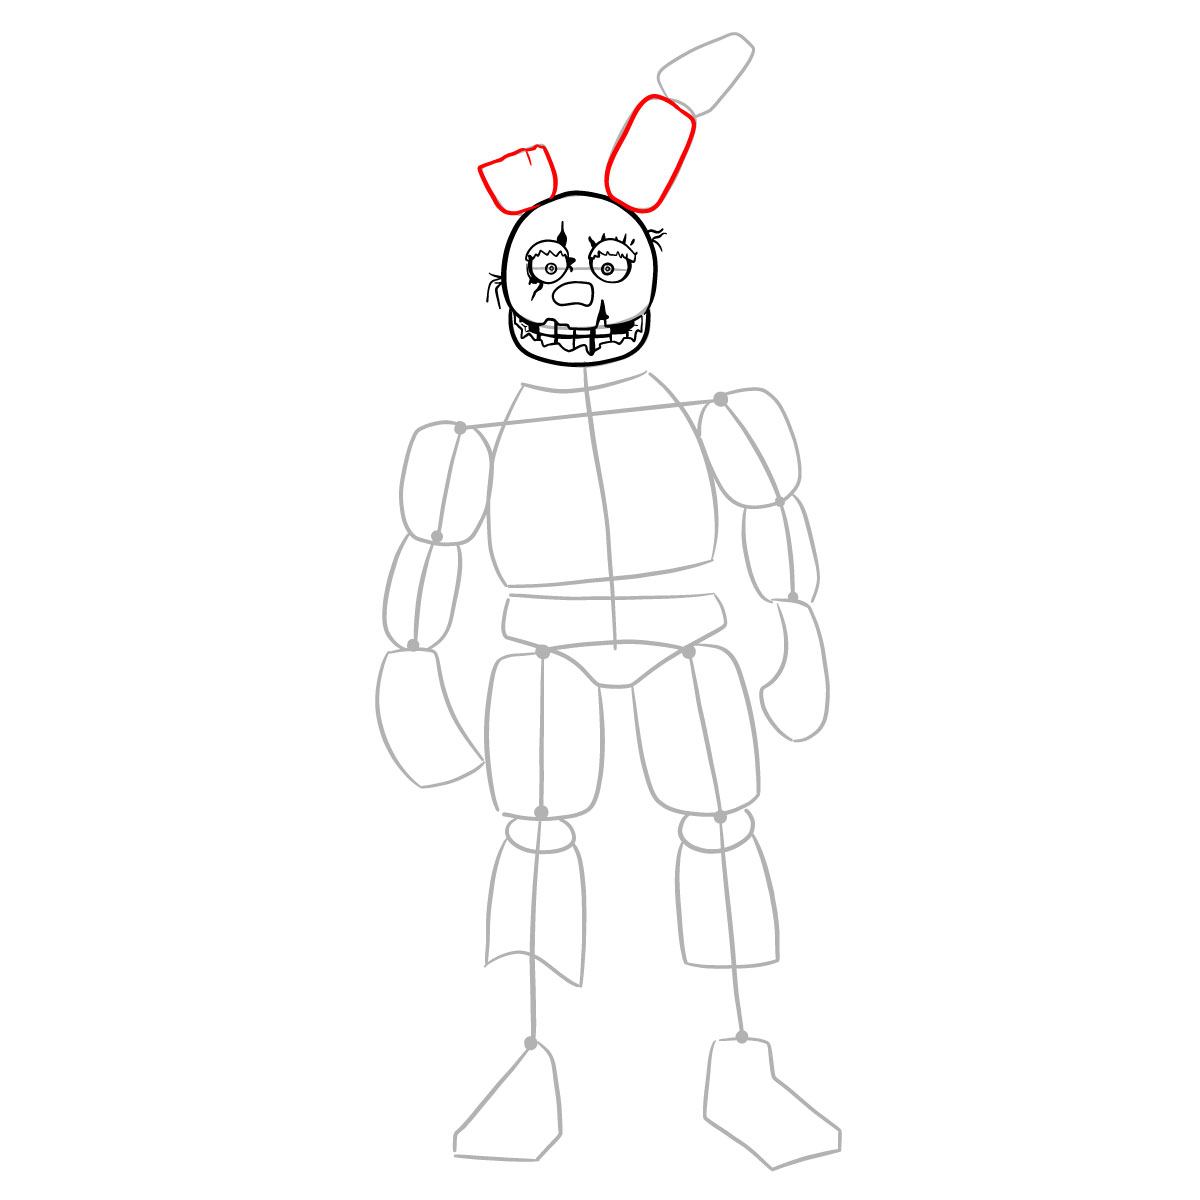 How to draw Springtrap from FNAF 3 - step 13